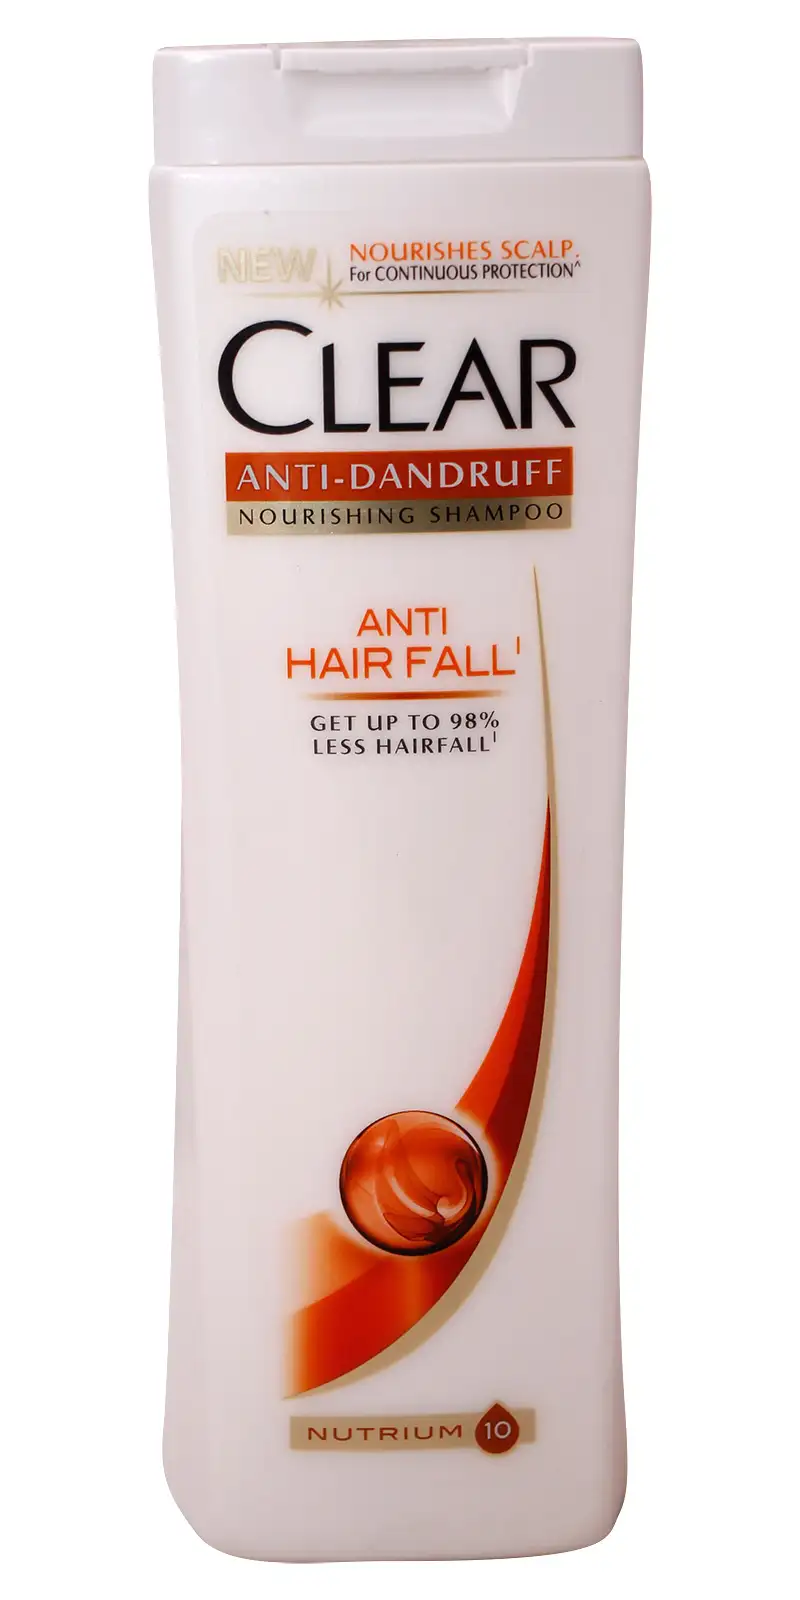 Clear Anti Dandruff Anti Hair Fall Shampoo 350ml - Buy Online at   at Best Price in Nepal